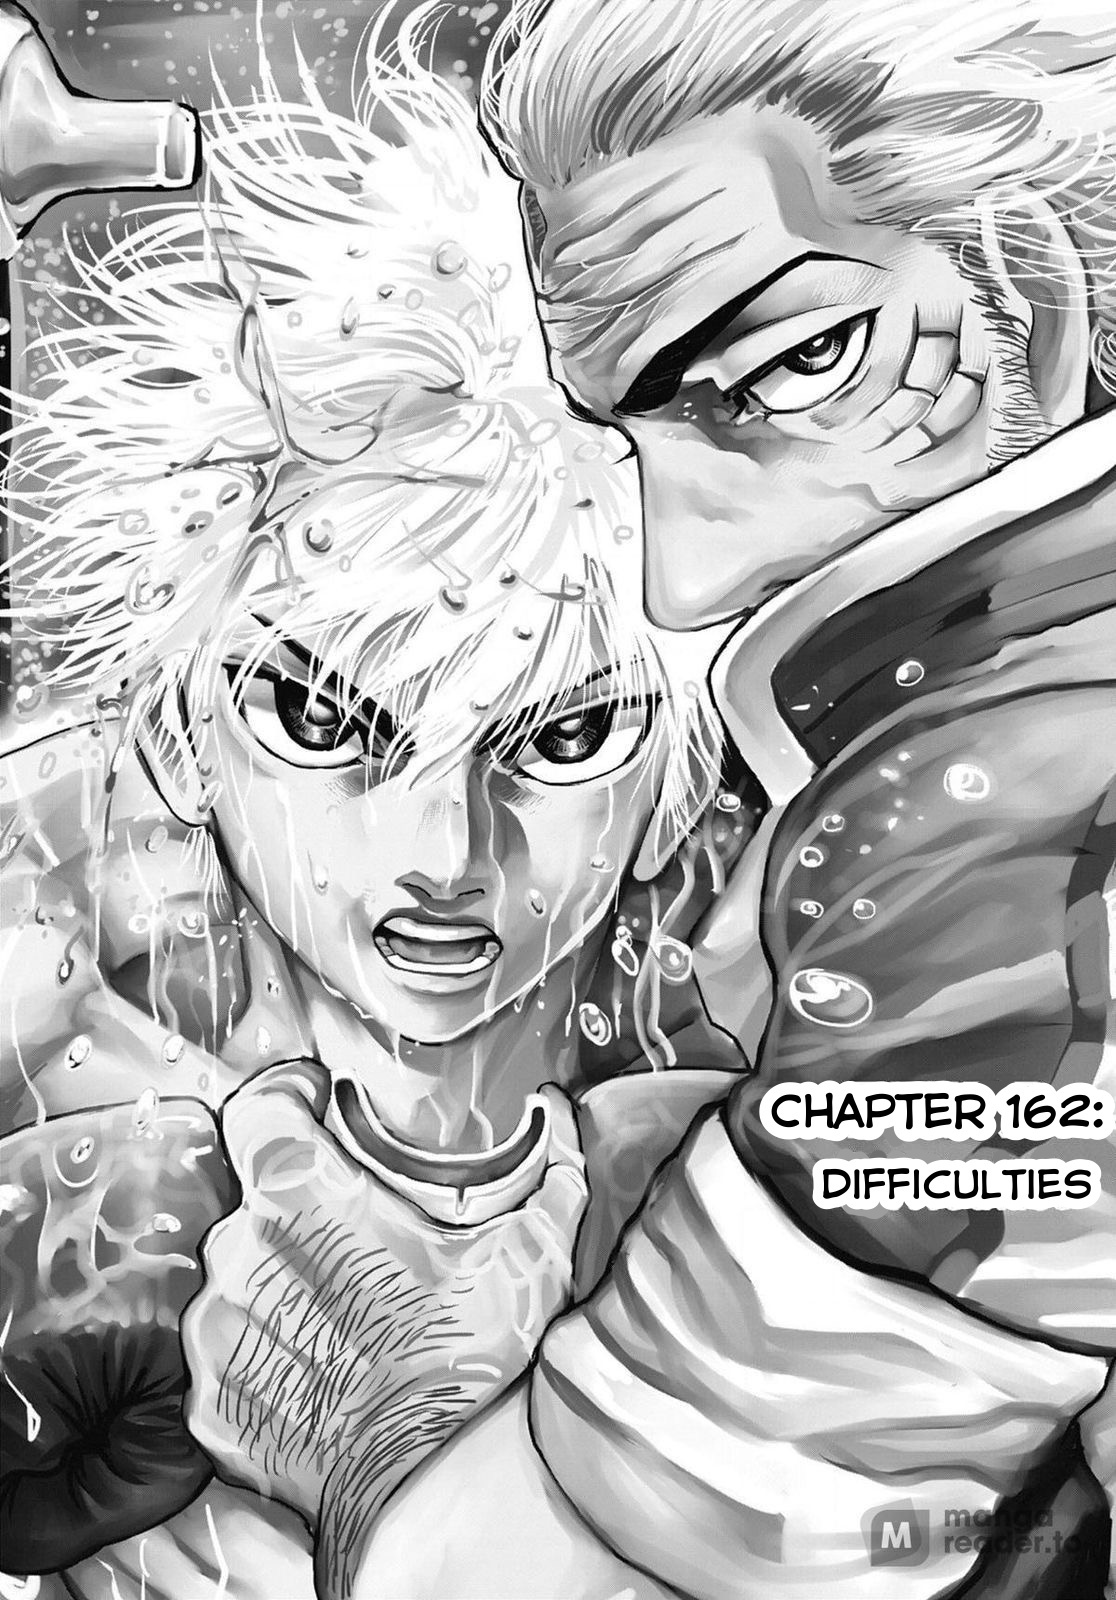 Rikudou Vol.16 Chapter 162: Difficulties - Picture 2